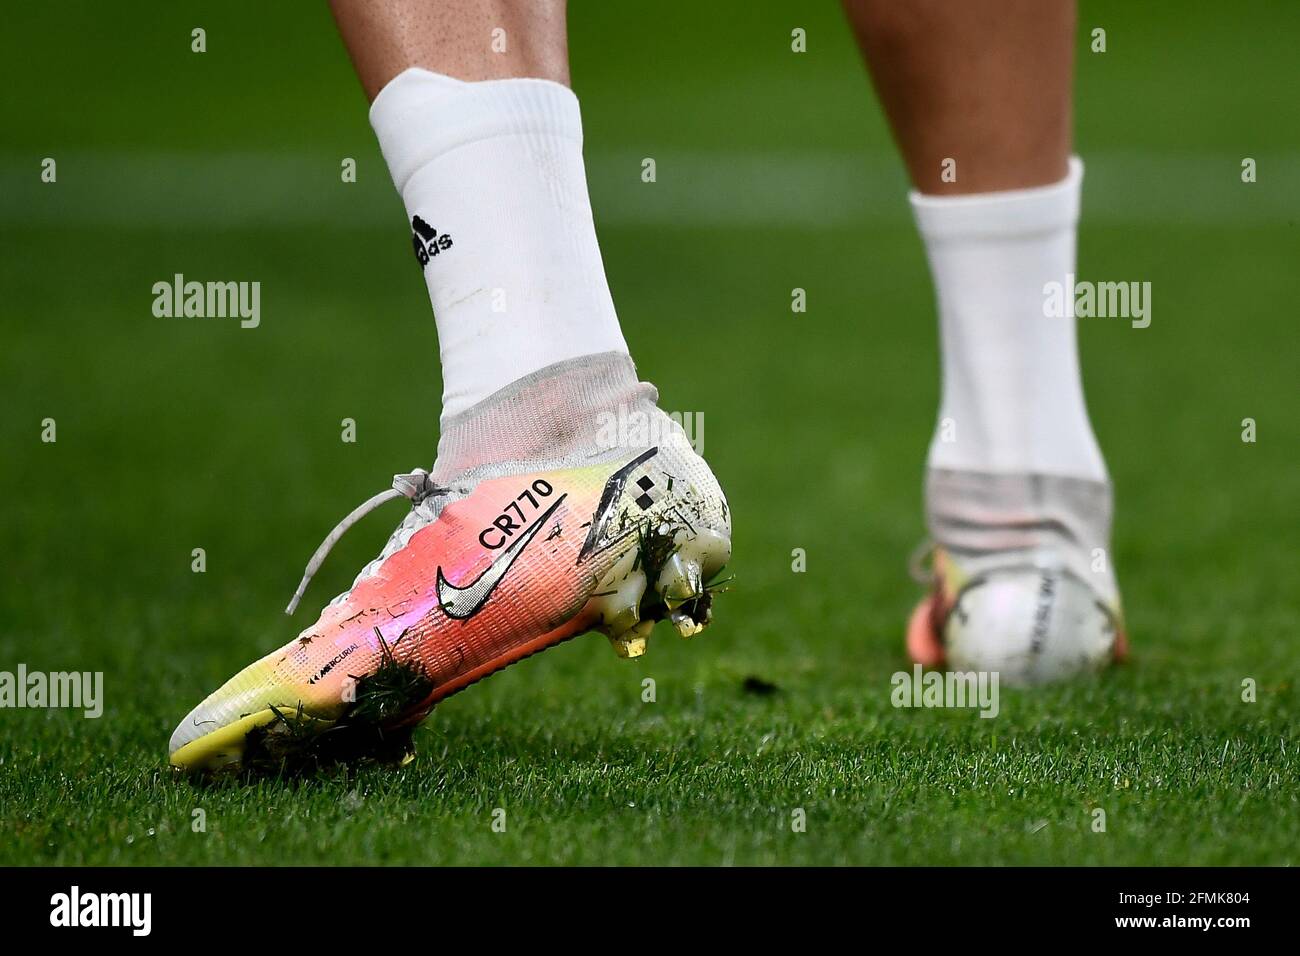 Turin, Italy. 09 May 2021. Personalised Nike Mercurial boots with the write  'CR770' of Cristiano Ronaldo of Juventus FC are seen during warm up prior  to the Serie A football match between